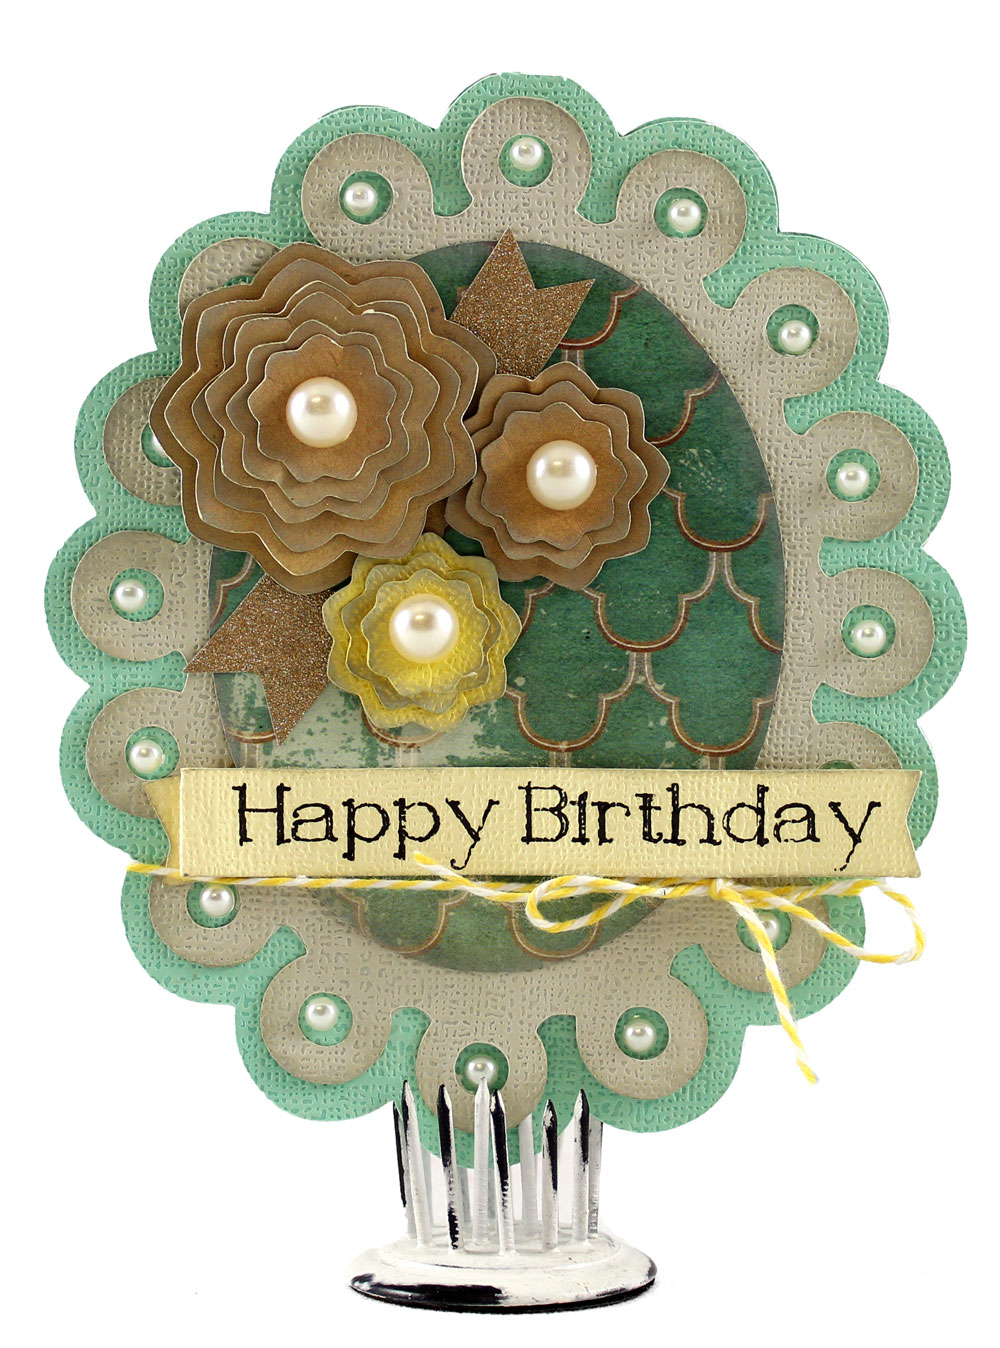 Scalloped-Floral-Birthday-Card-MP